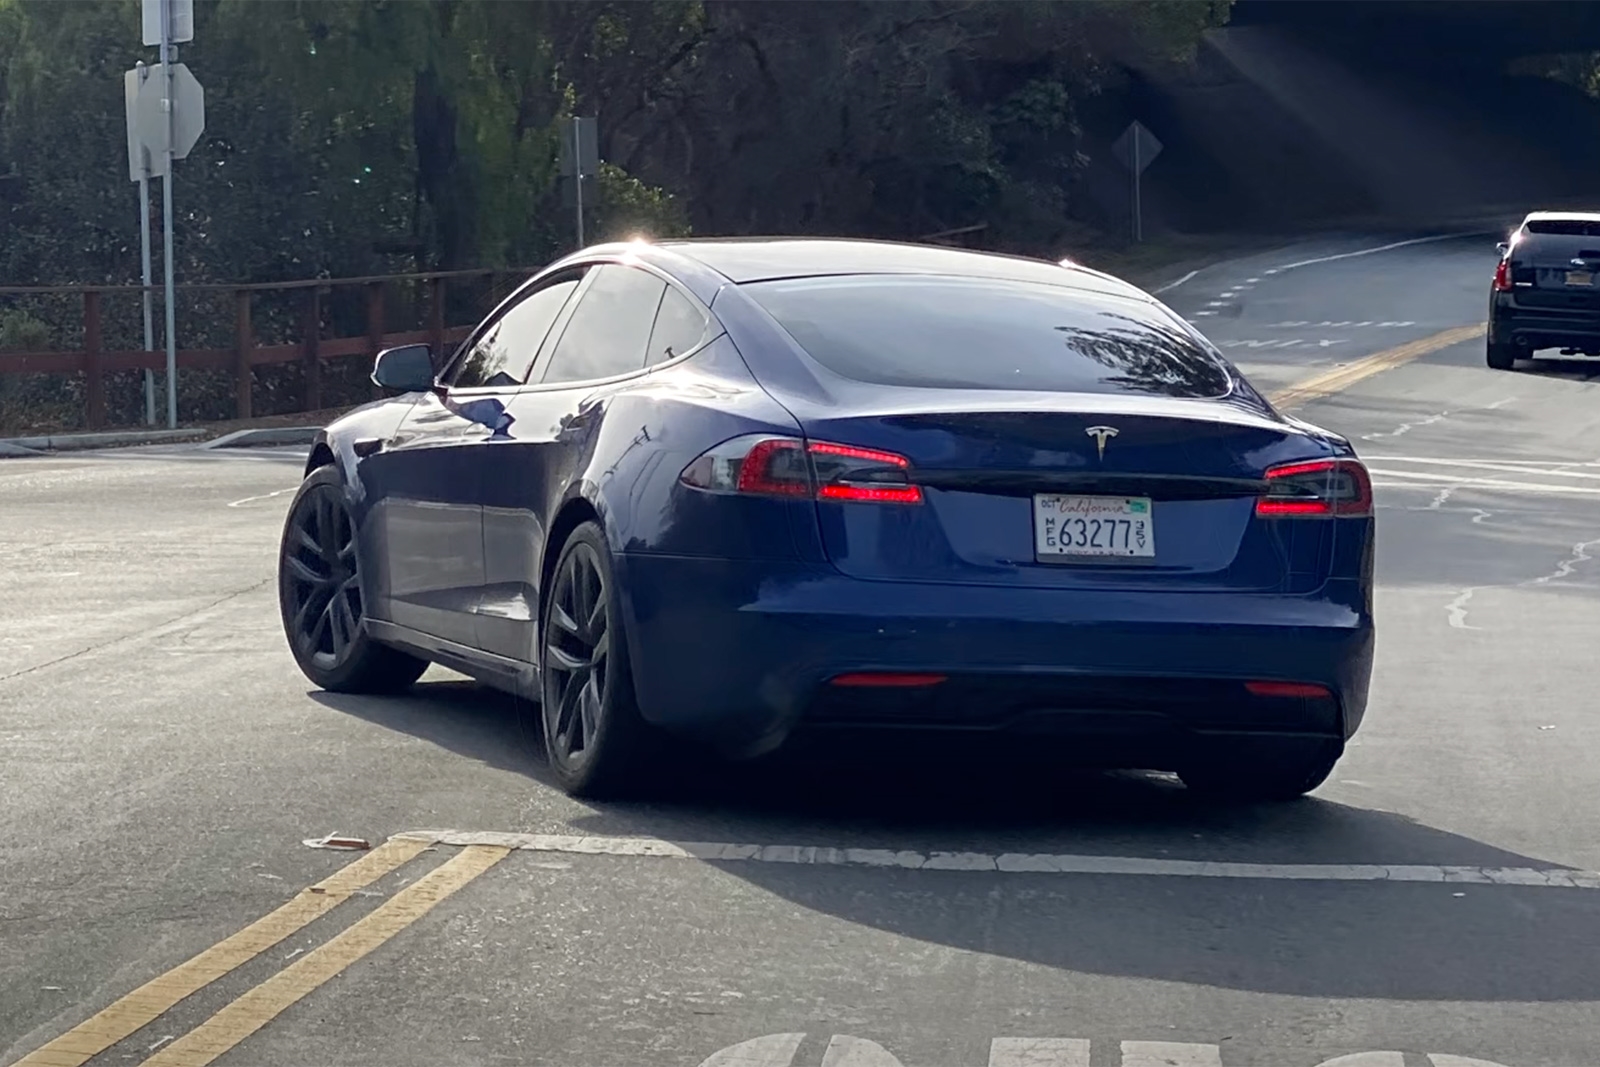 Tesla's refreshed Model S design may have been spotted on the road | DeviceDaily.com